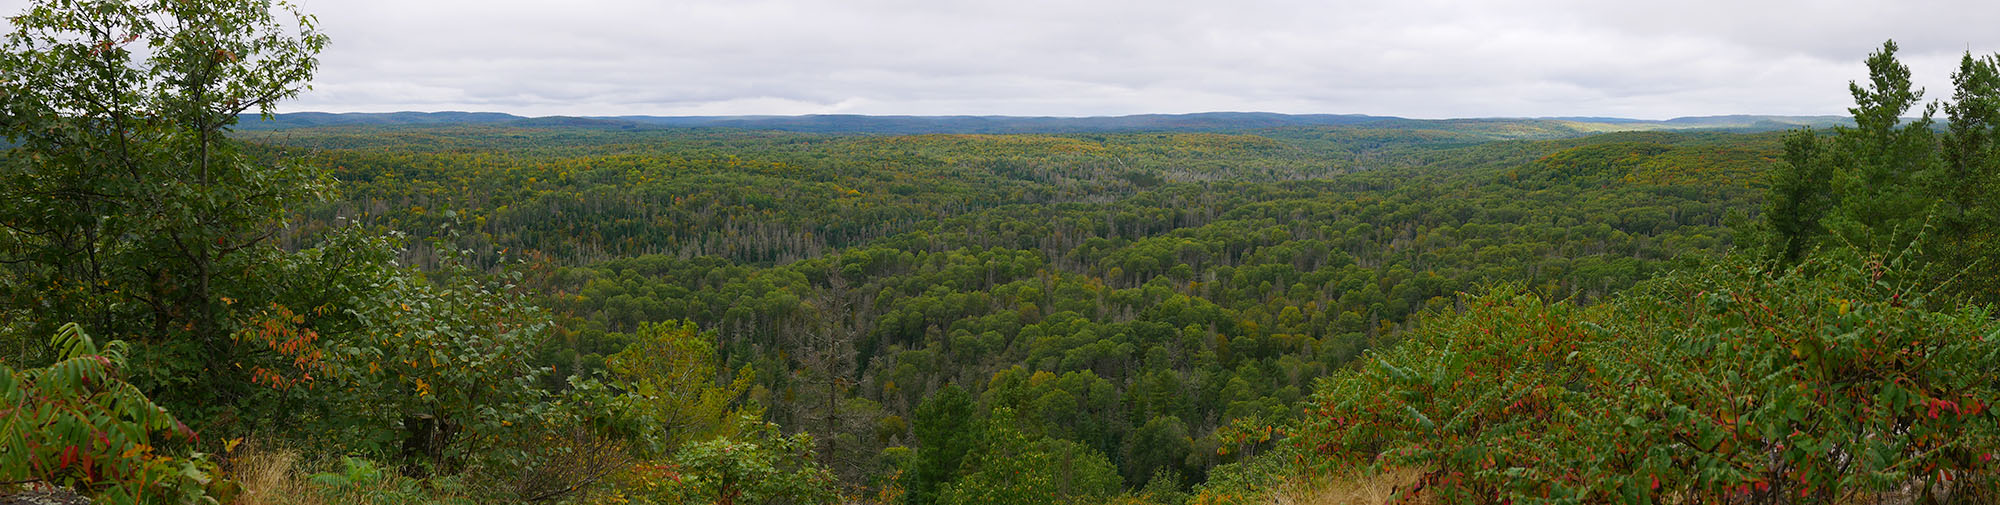 panorama view of a lush green forested valley under a cool grey sky